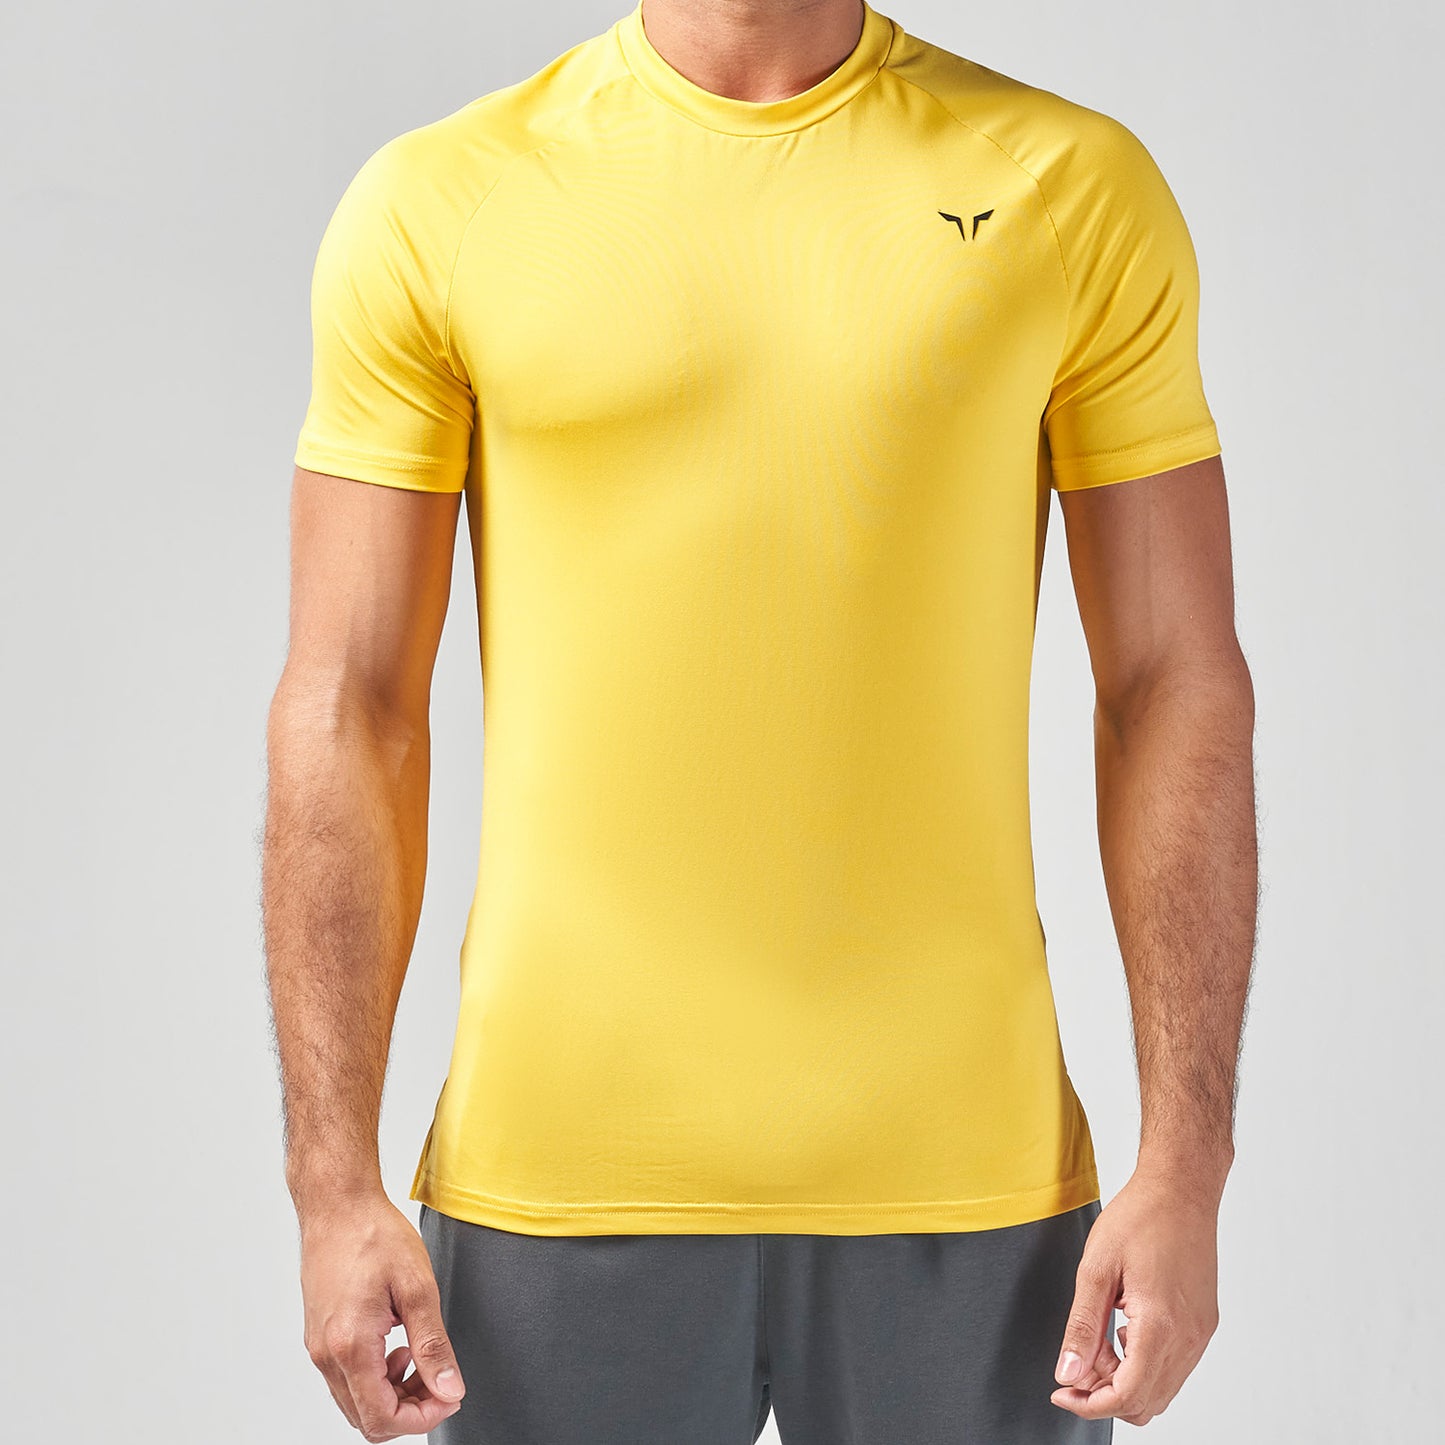 squatwolf-gym-wear-essential-ultralight-gym-tee-yellow-workout-shirts-for-men